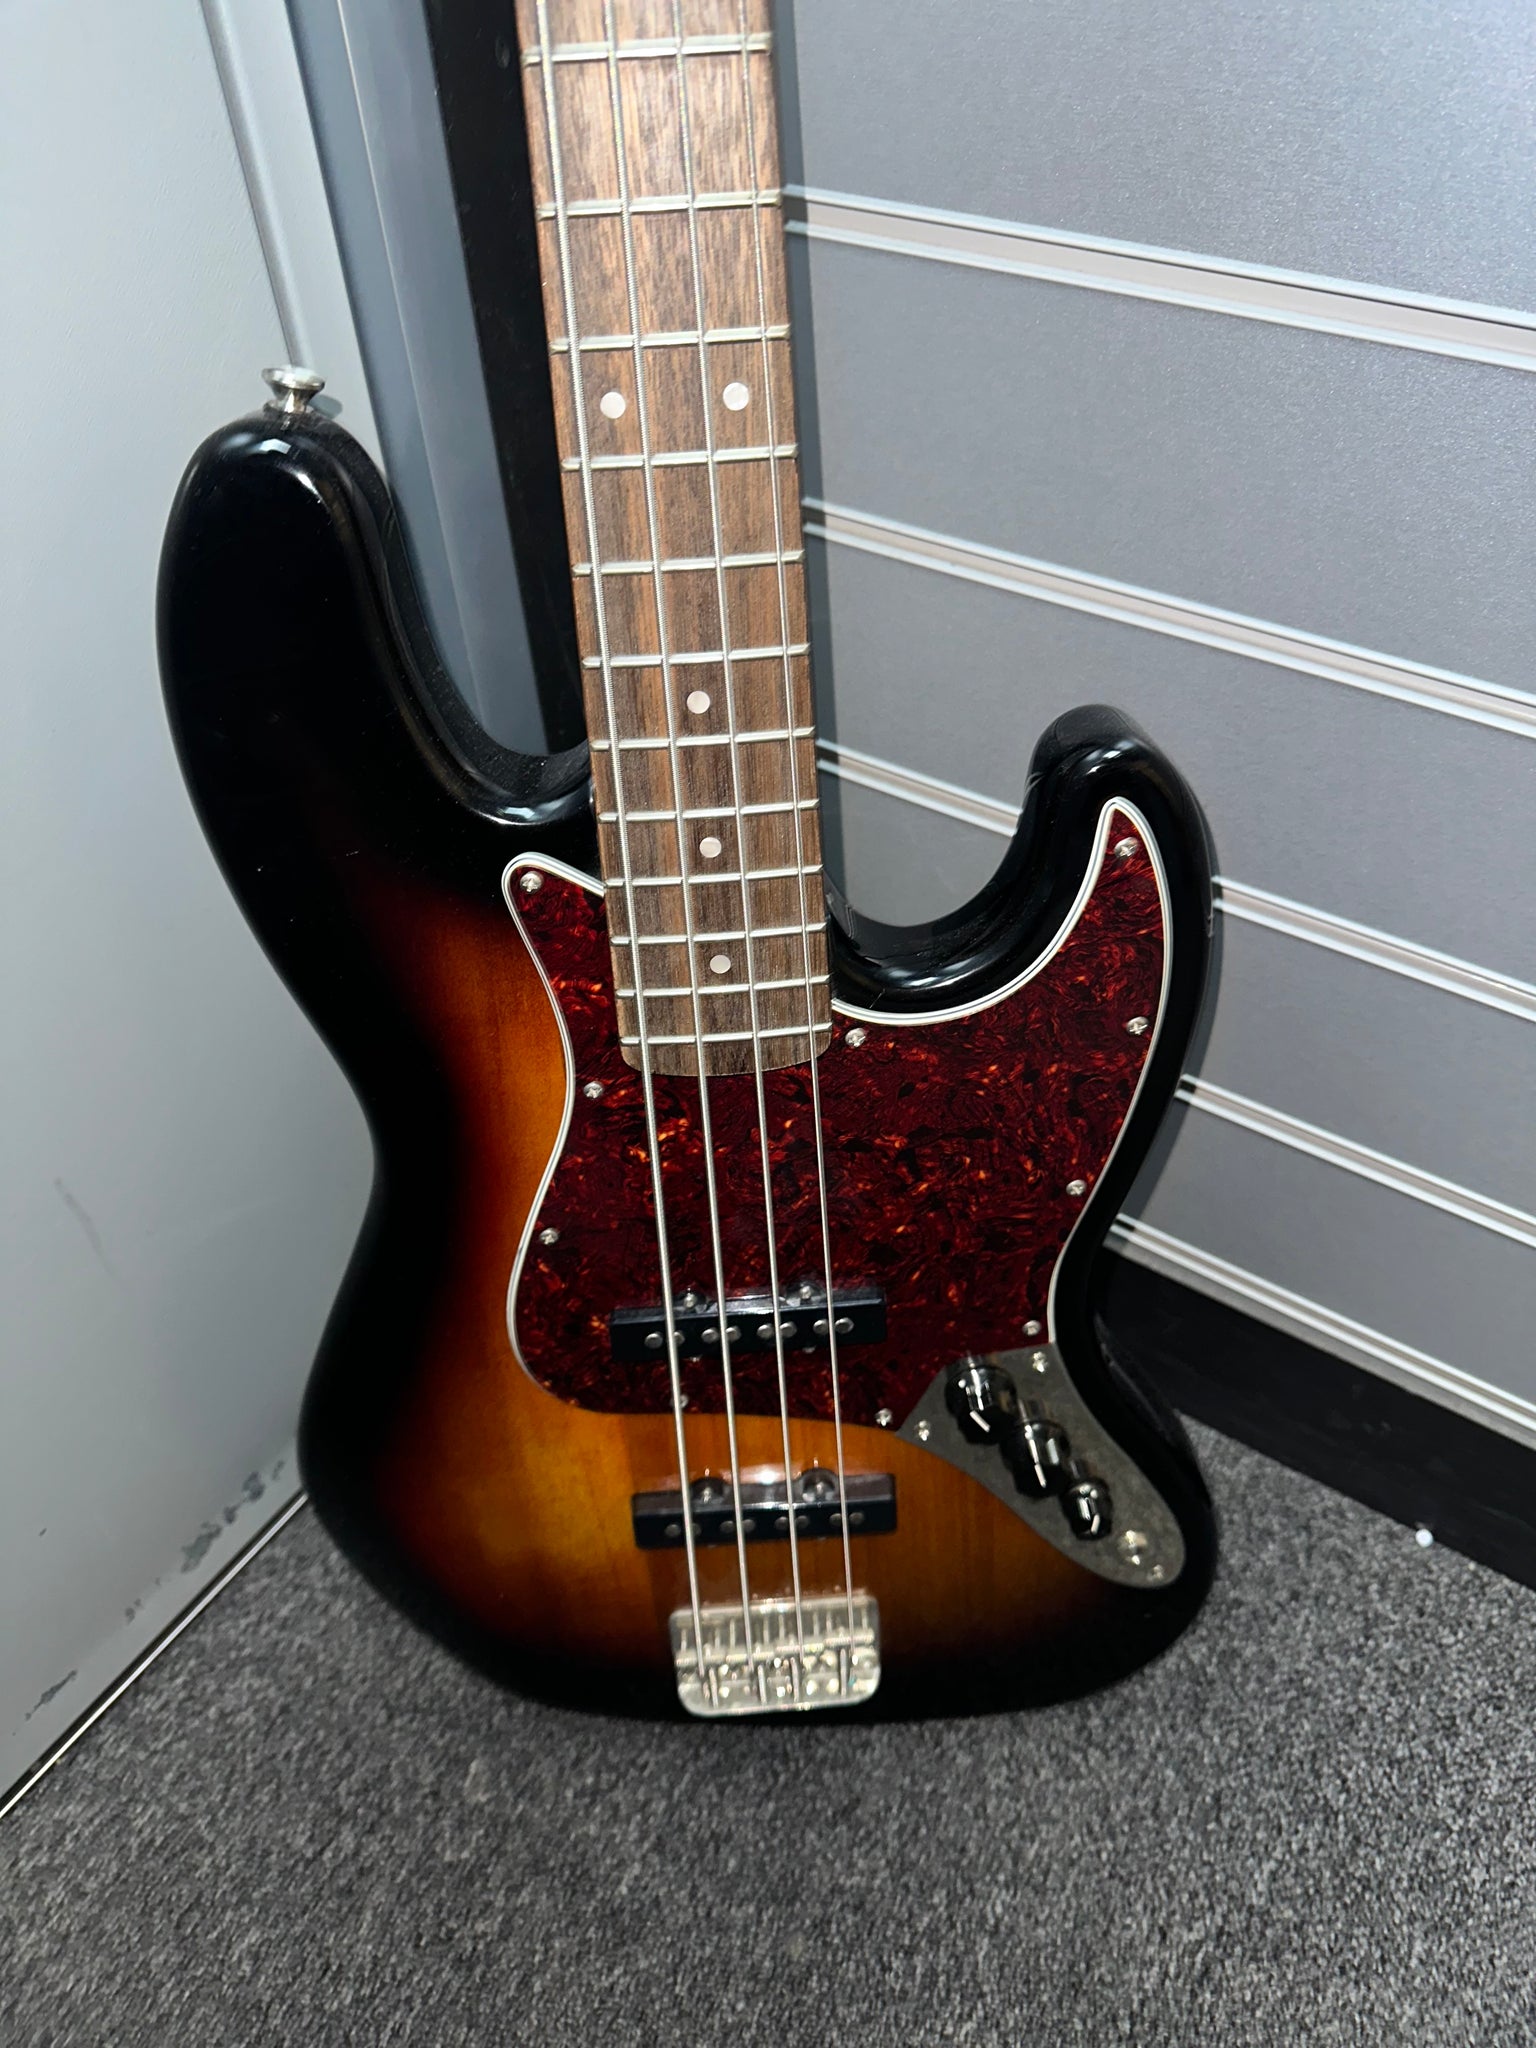 FENDER SQUIRE BASS GUITAR BROWN